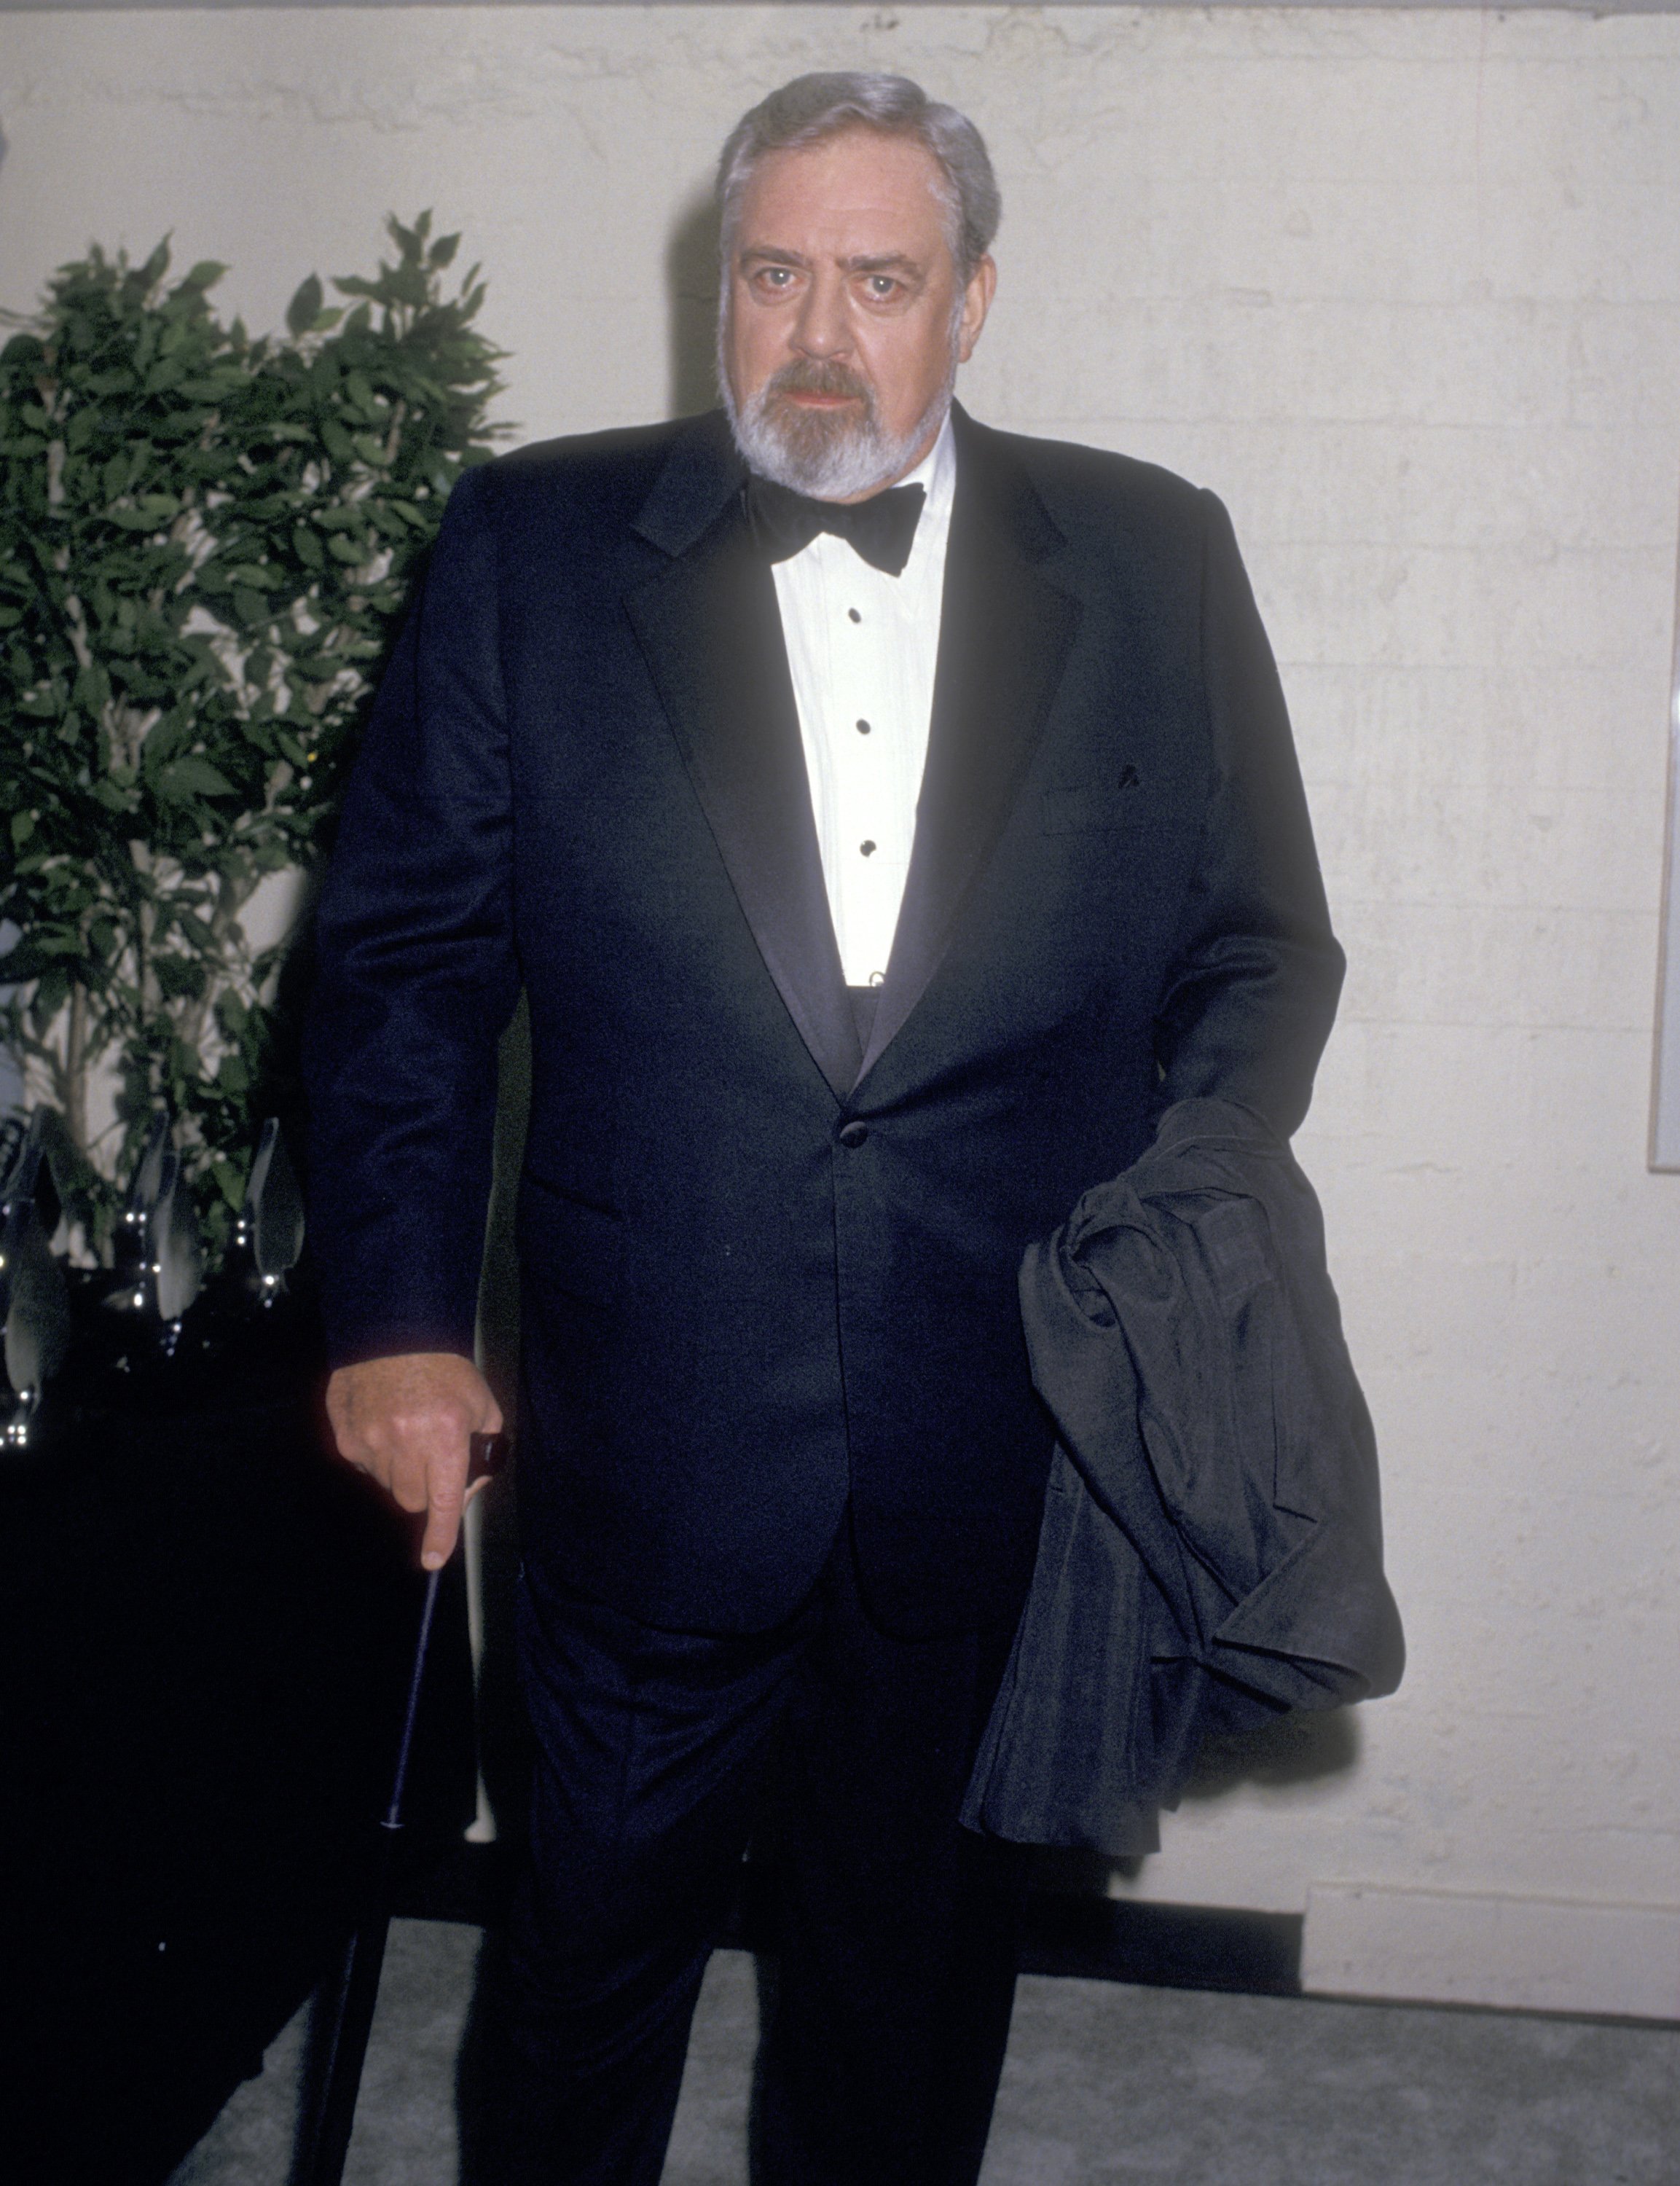 Raymond Burr attends the 8th Annual National CableACE Awards on January 20, 1987 at Wiltern Theatre in Los Angeles, California ┃Source: Getty Images